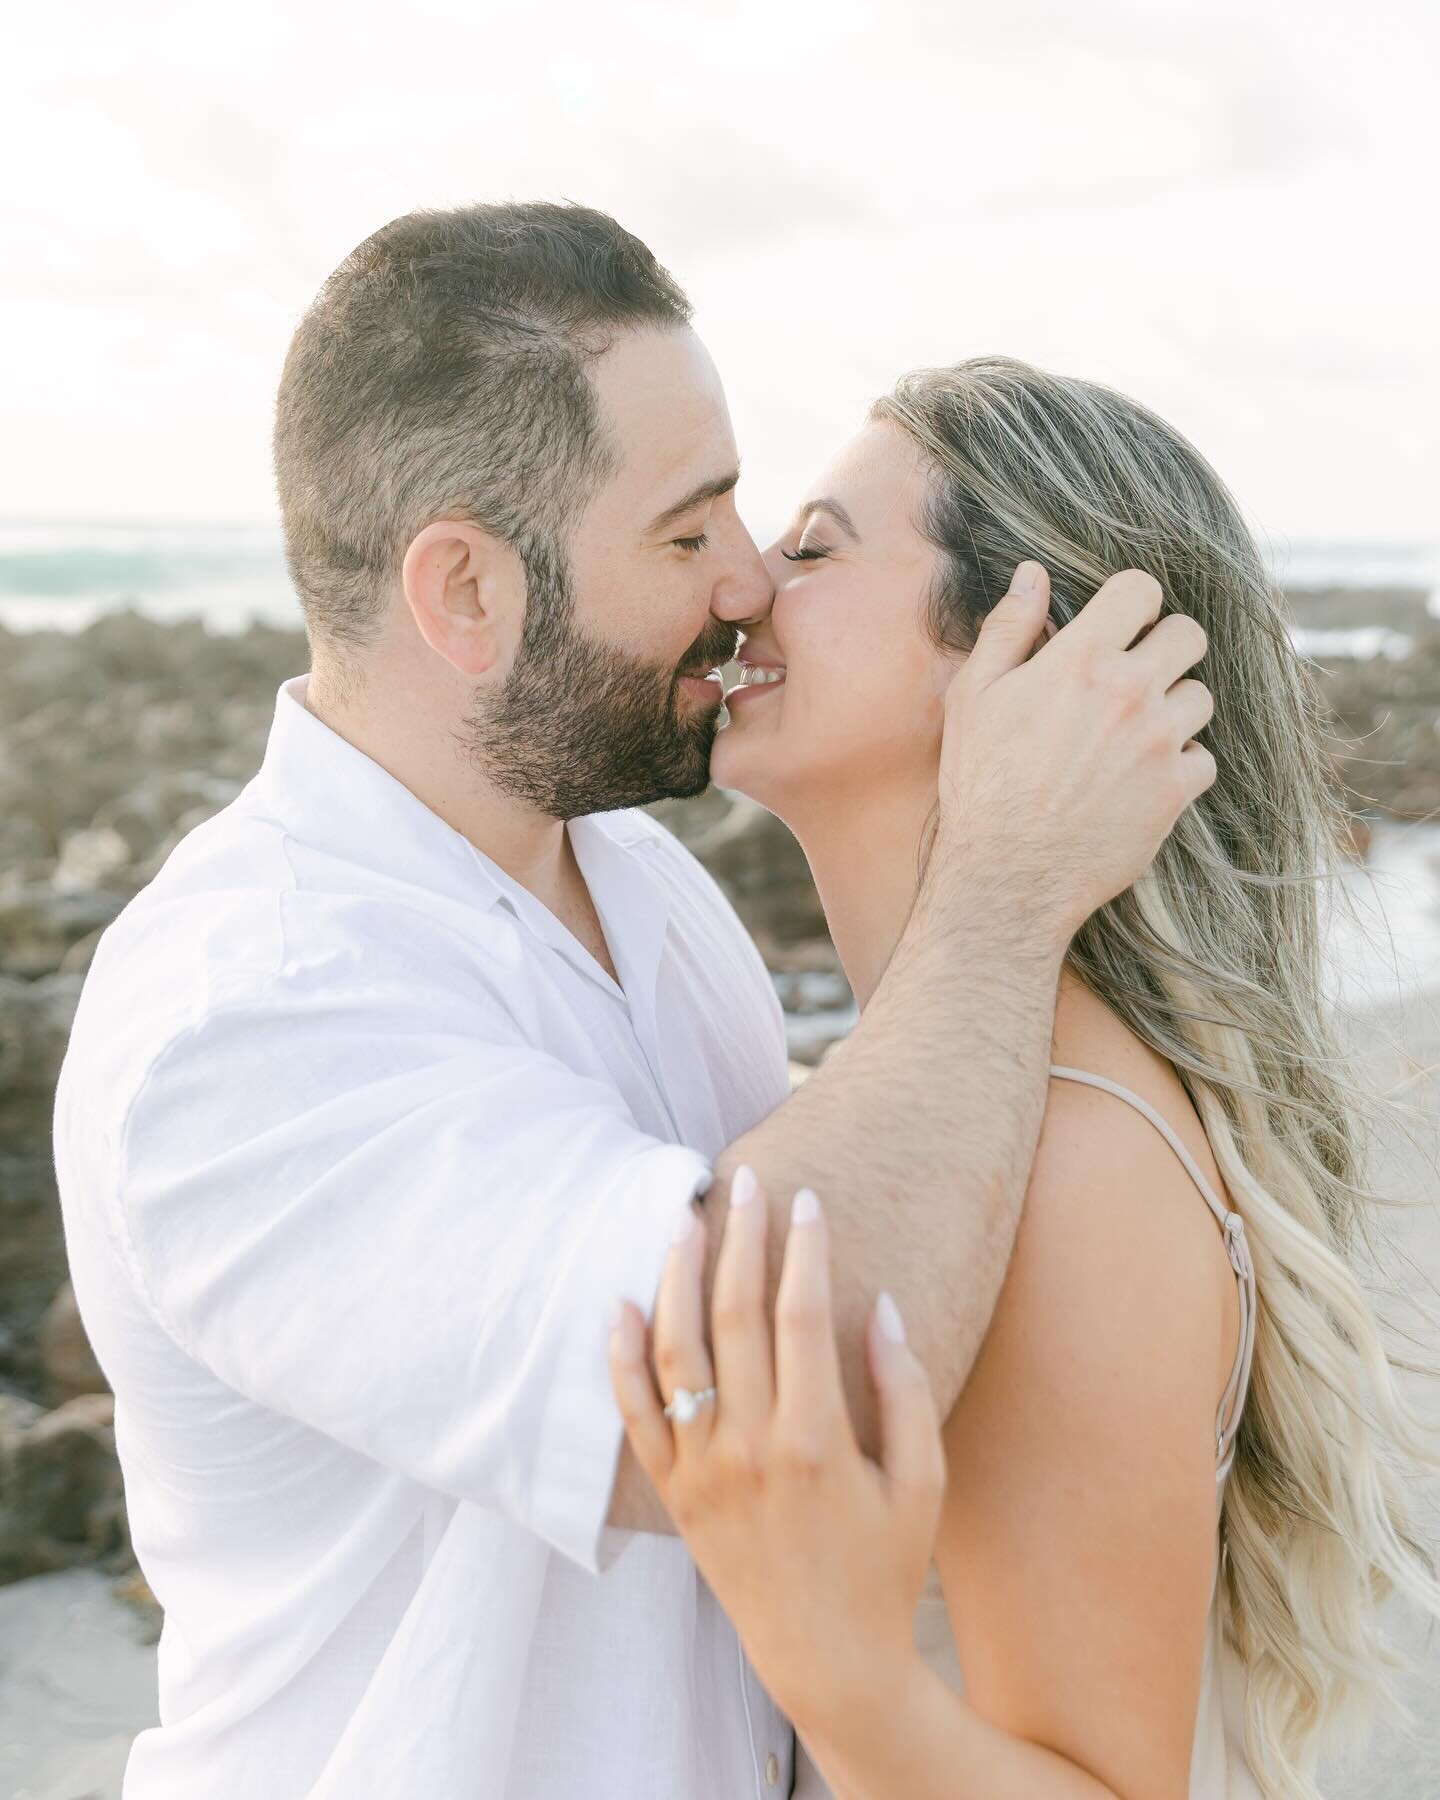 A windy beach day with these lovers who wanted romantic photos to celebrate their engagement. 💕💕🌊

.
.
.
.
#puertovallartaweddingphotographer #miamiweddingphotographer #miamiphotographer #miamiengagementphotographer #miamiphotographer #couplegoals